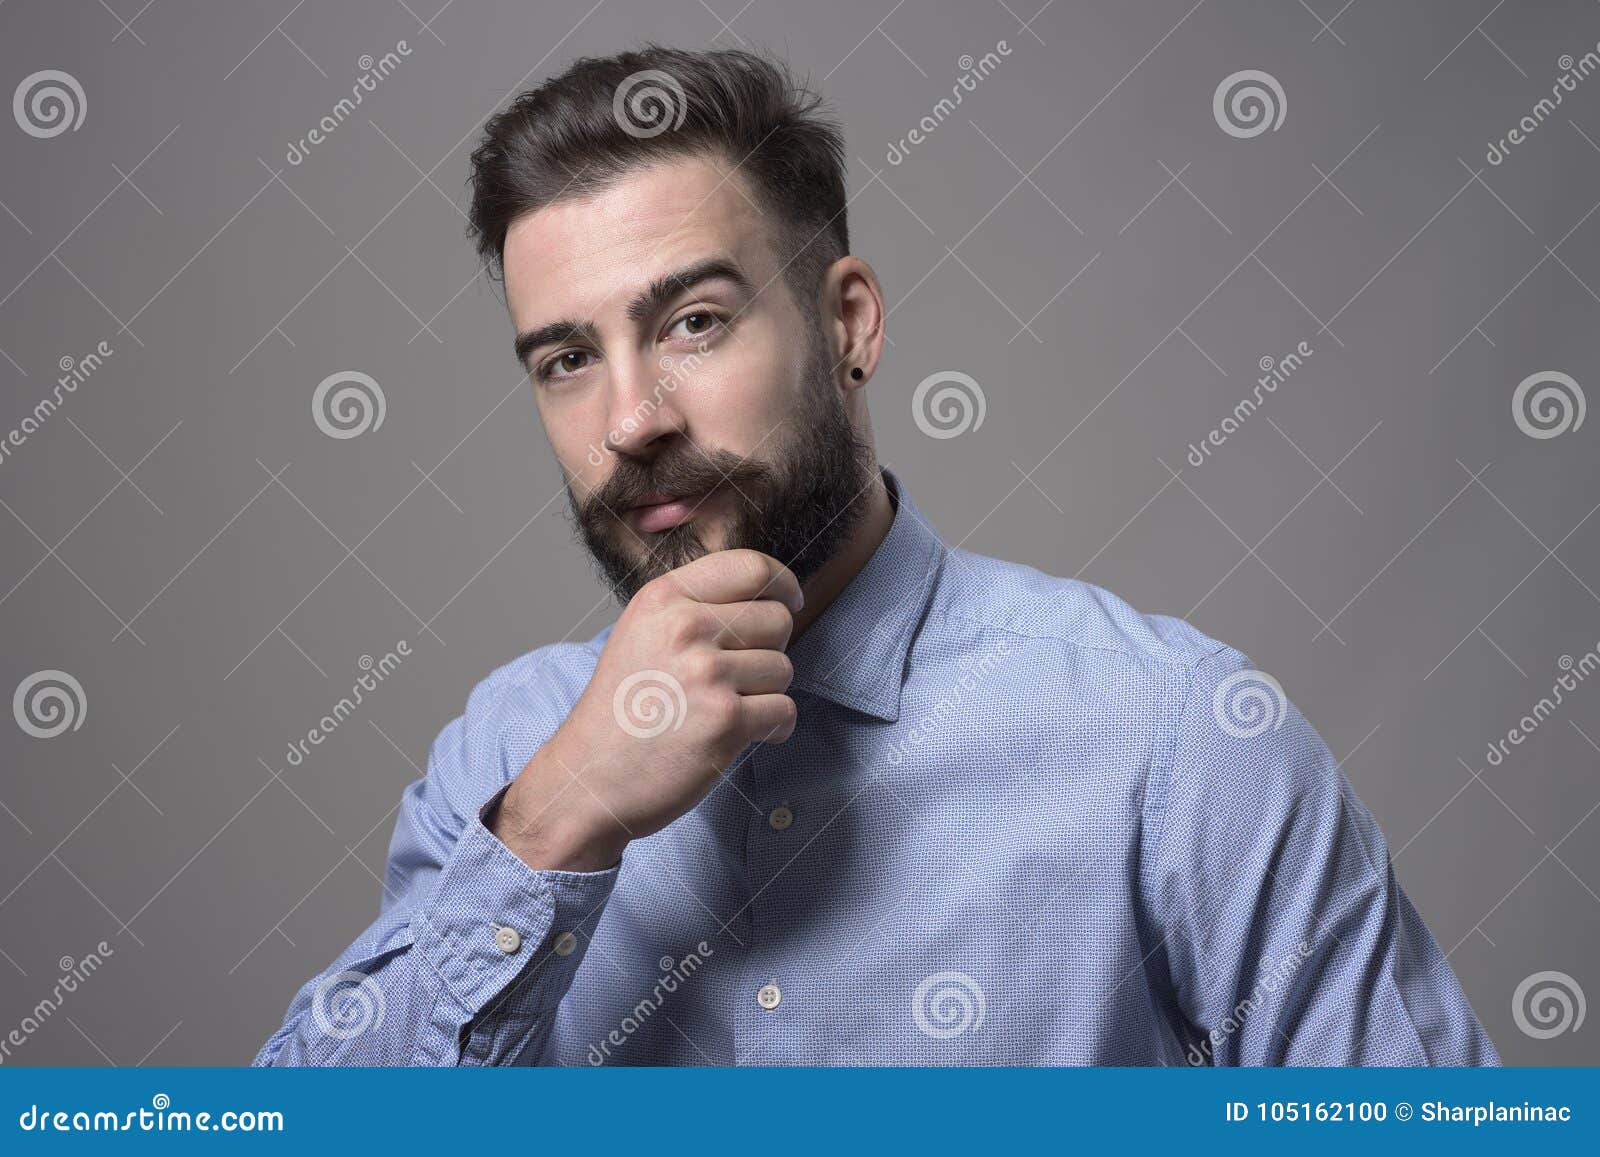 Successful Young Adult Business Man Touching Beard Looking at Camera ...